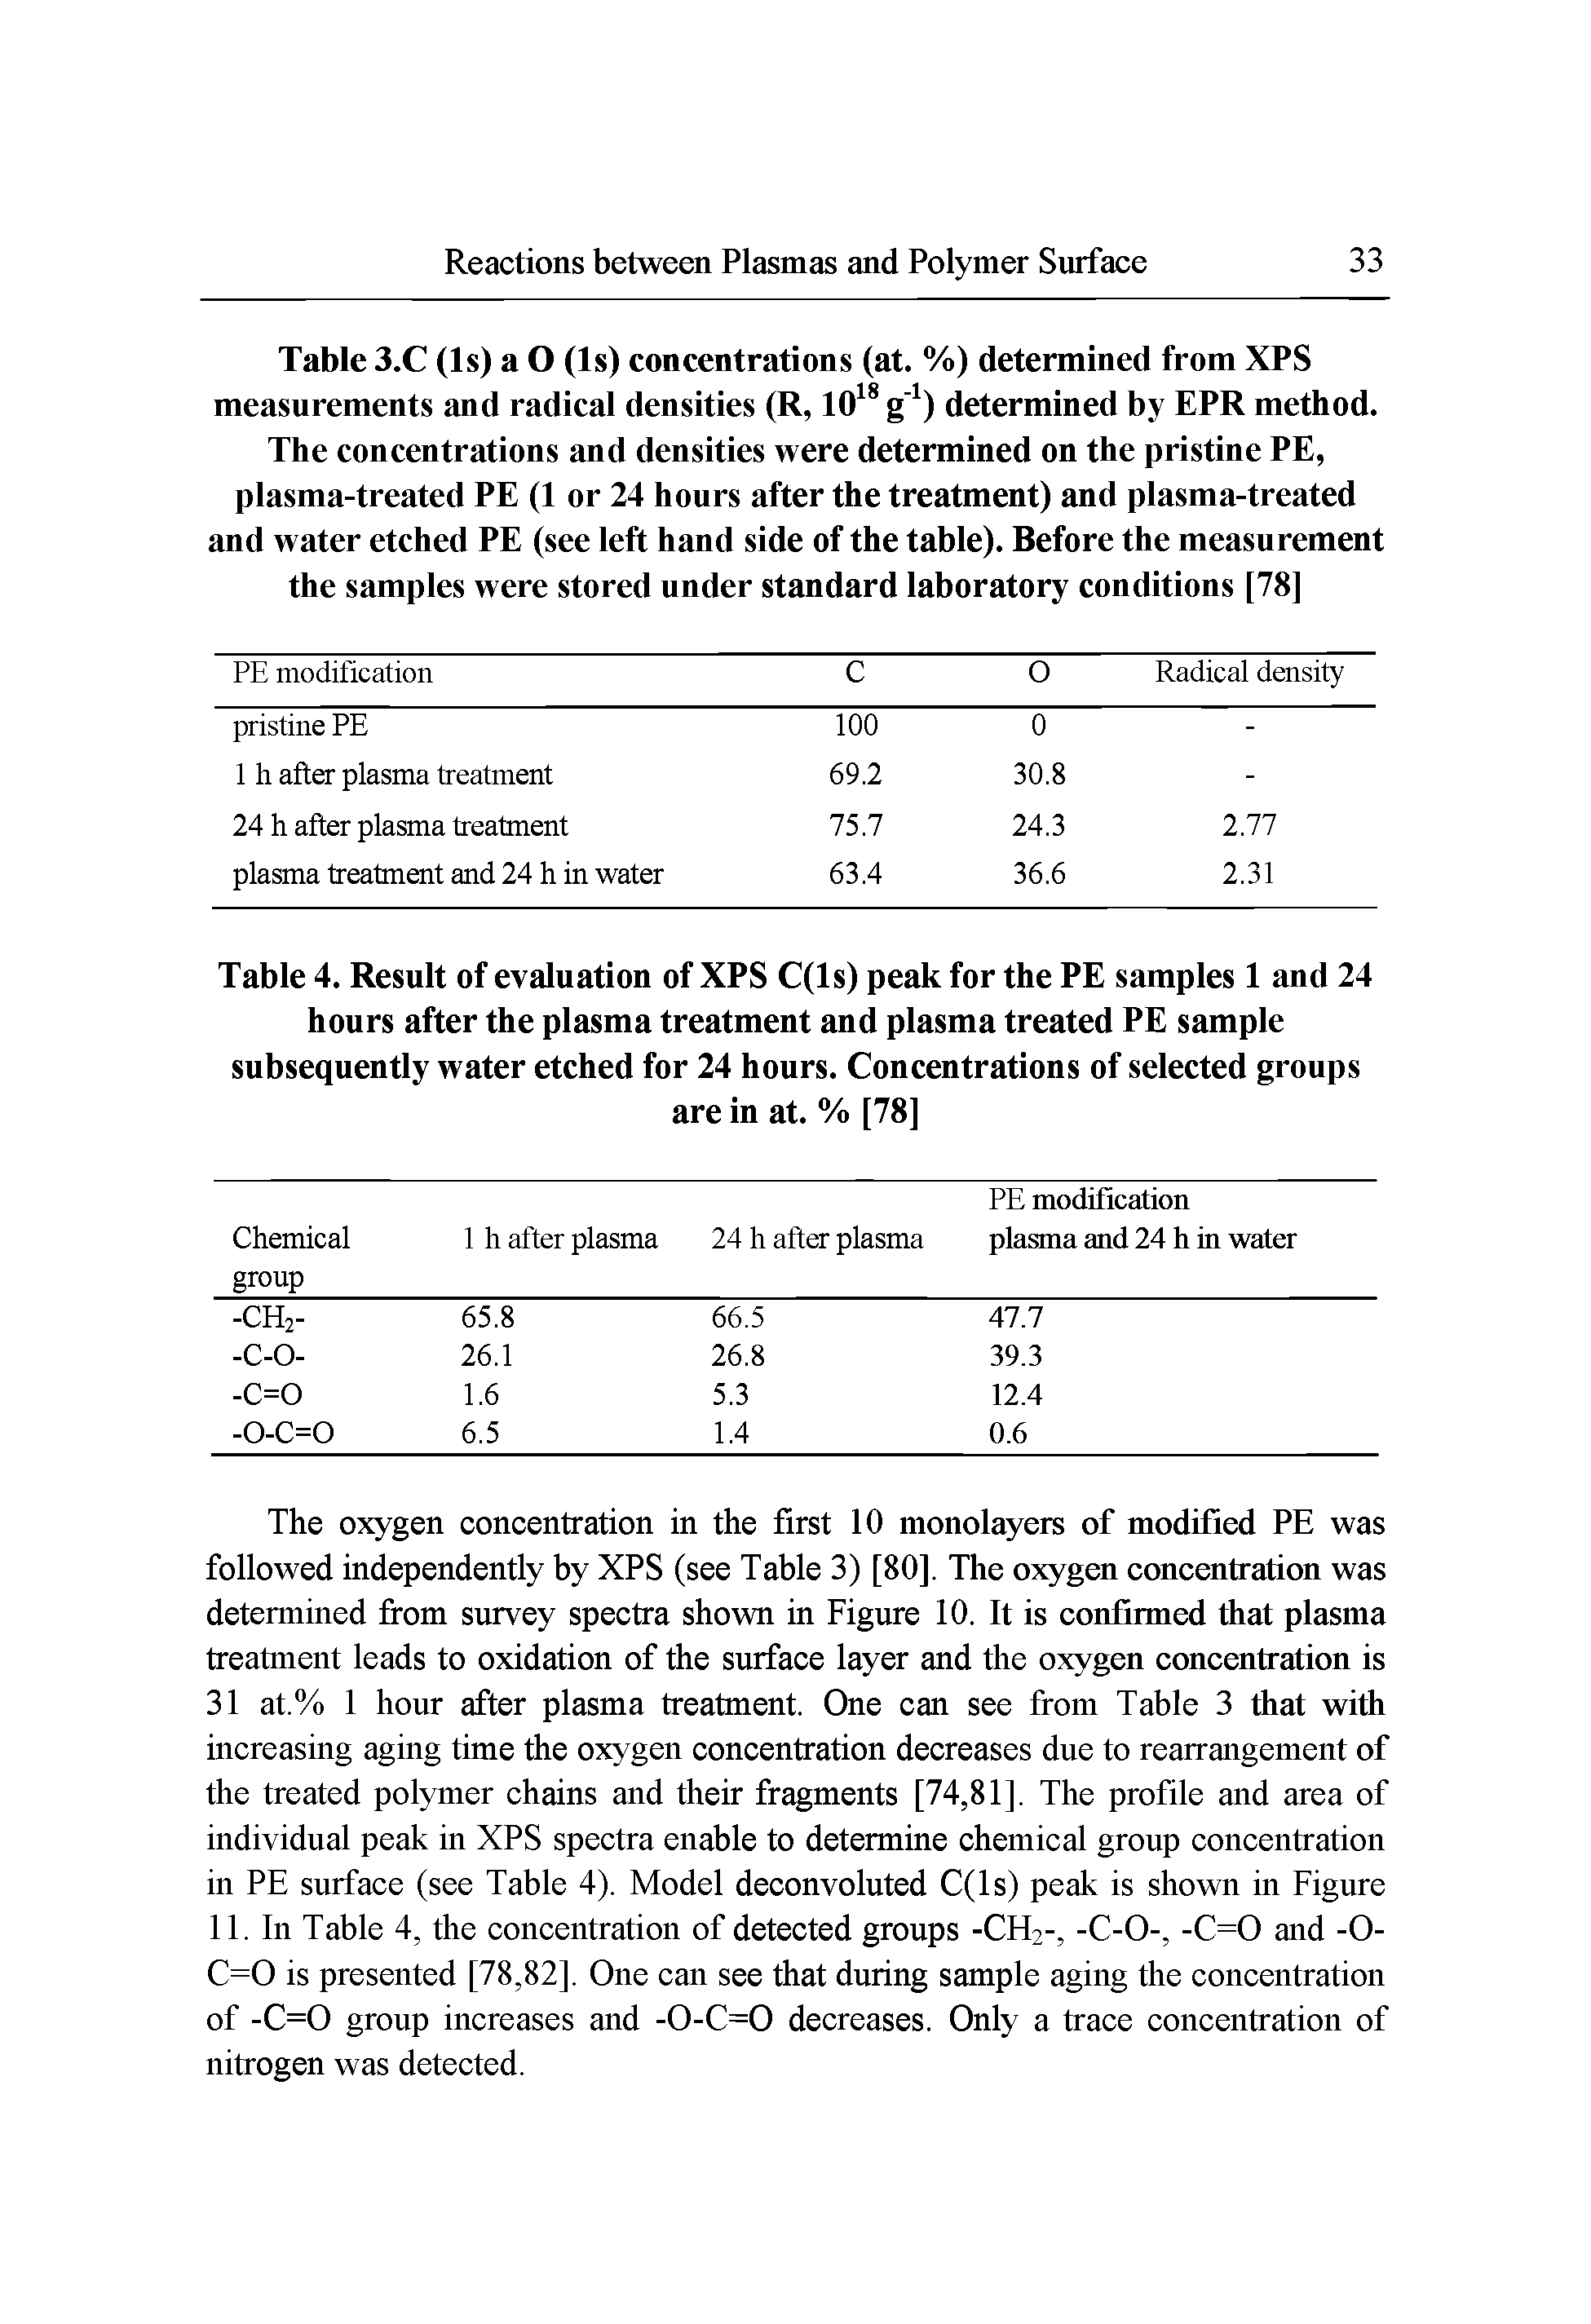 Table 3.C (Is) a O (Is) concentrations (at. %) determined from XPS measurements and radical densities (R, 10 g ) determined by EPR method. The concentrations and densities were determined on the pristine PE, plasma-treated PE (1 or 24 hours after the treatment) and plasma-treated and water etched PE (see left hand side of the table). Before the measurement the samples were stored under standard laboratory conditions [78]...